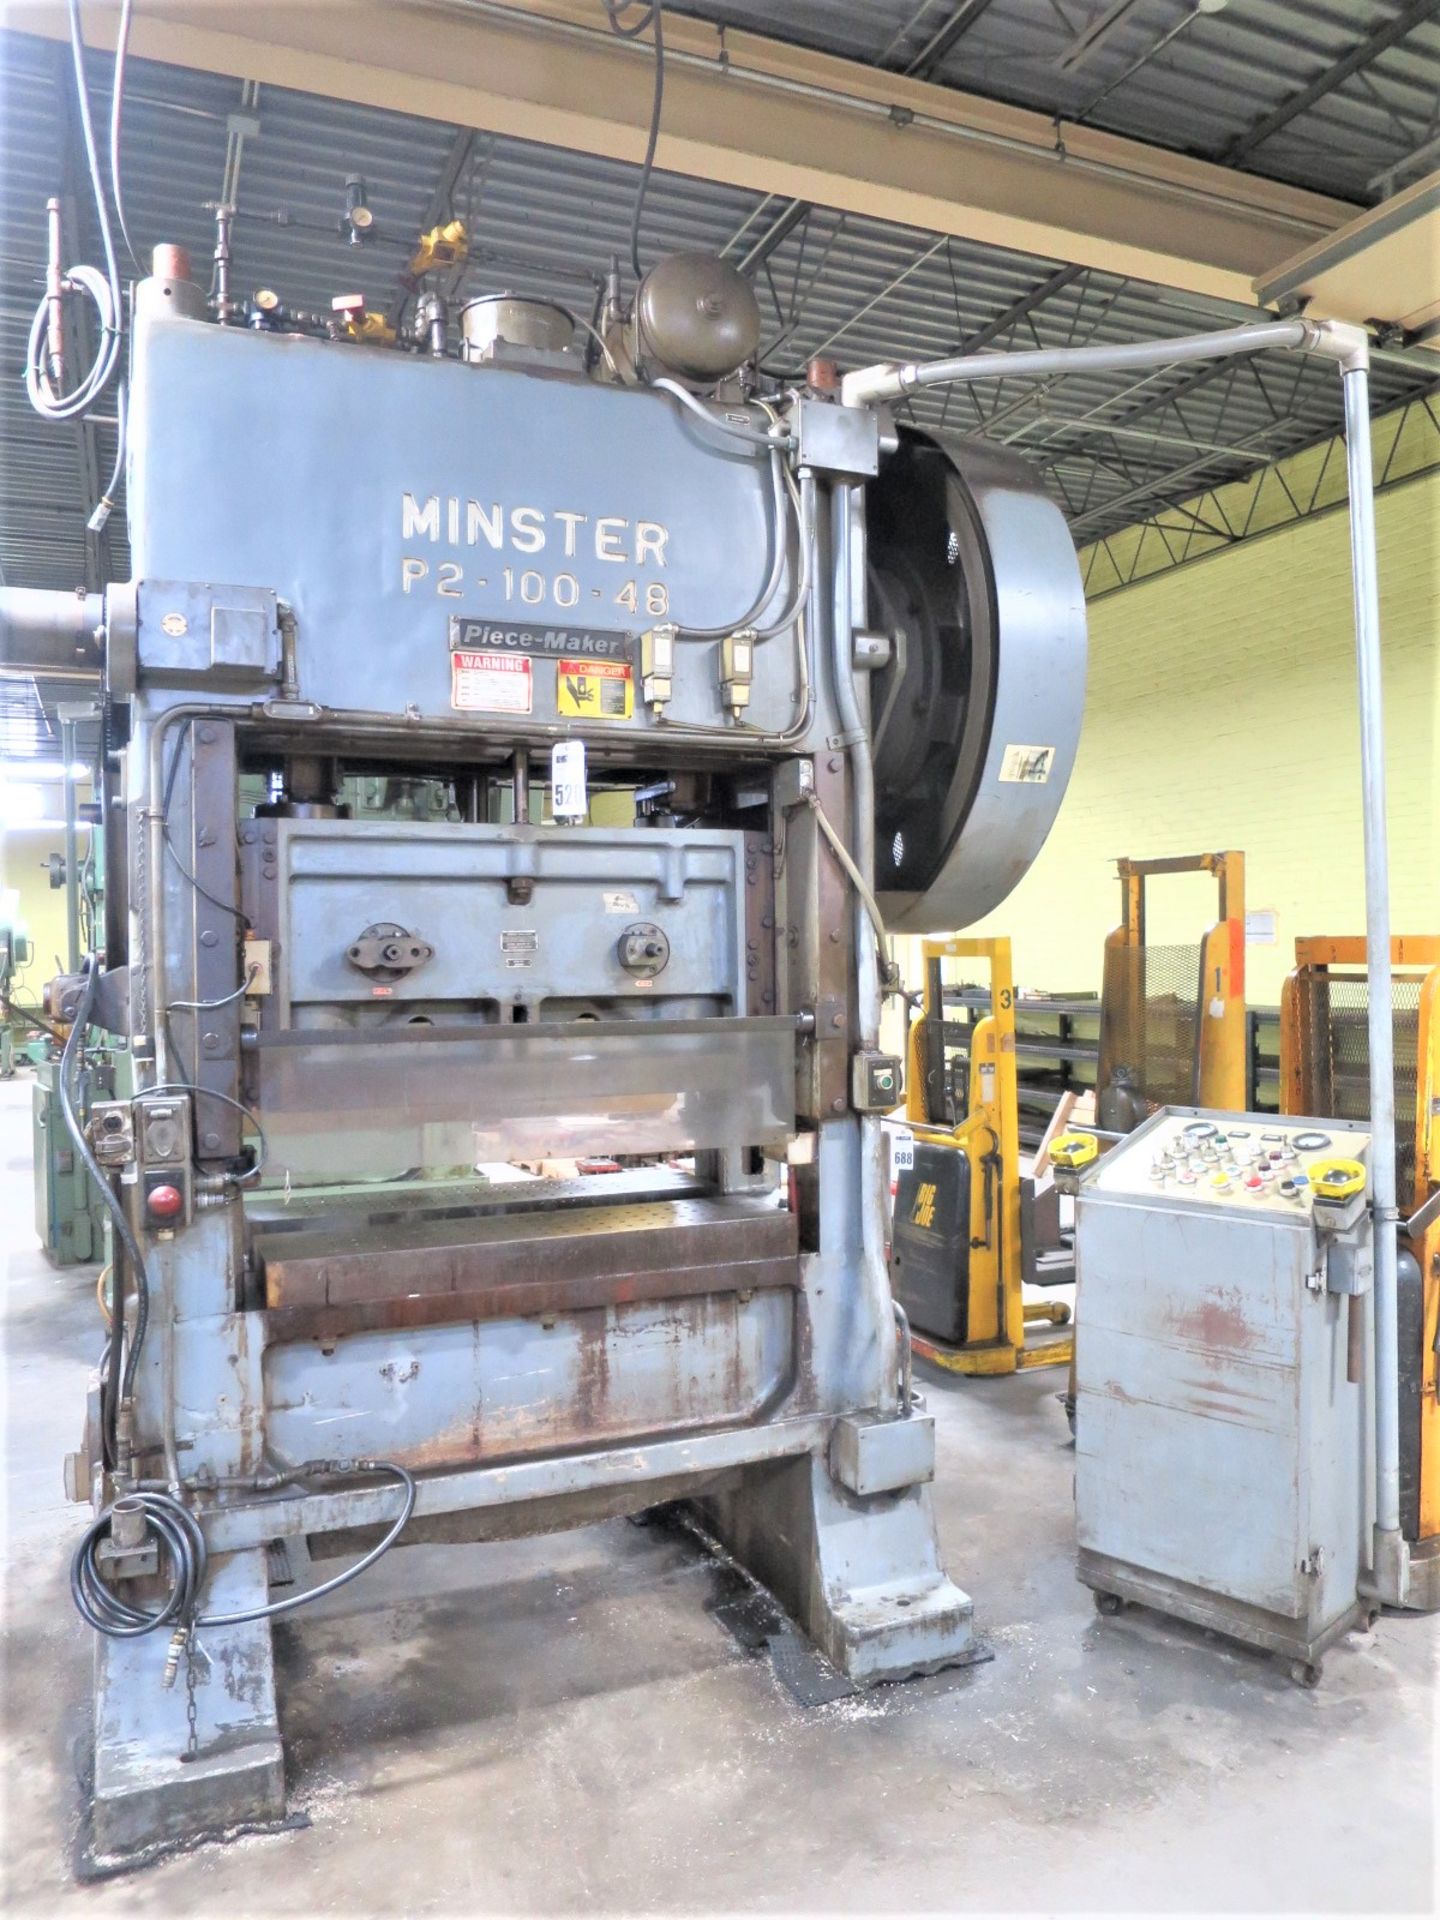 Minster 100 Ton Piece-Maker Variable Speed Stamping Press Model P2-100-48, Sn P2-100-18493 48 x 31